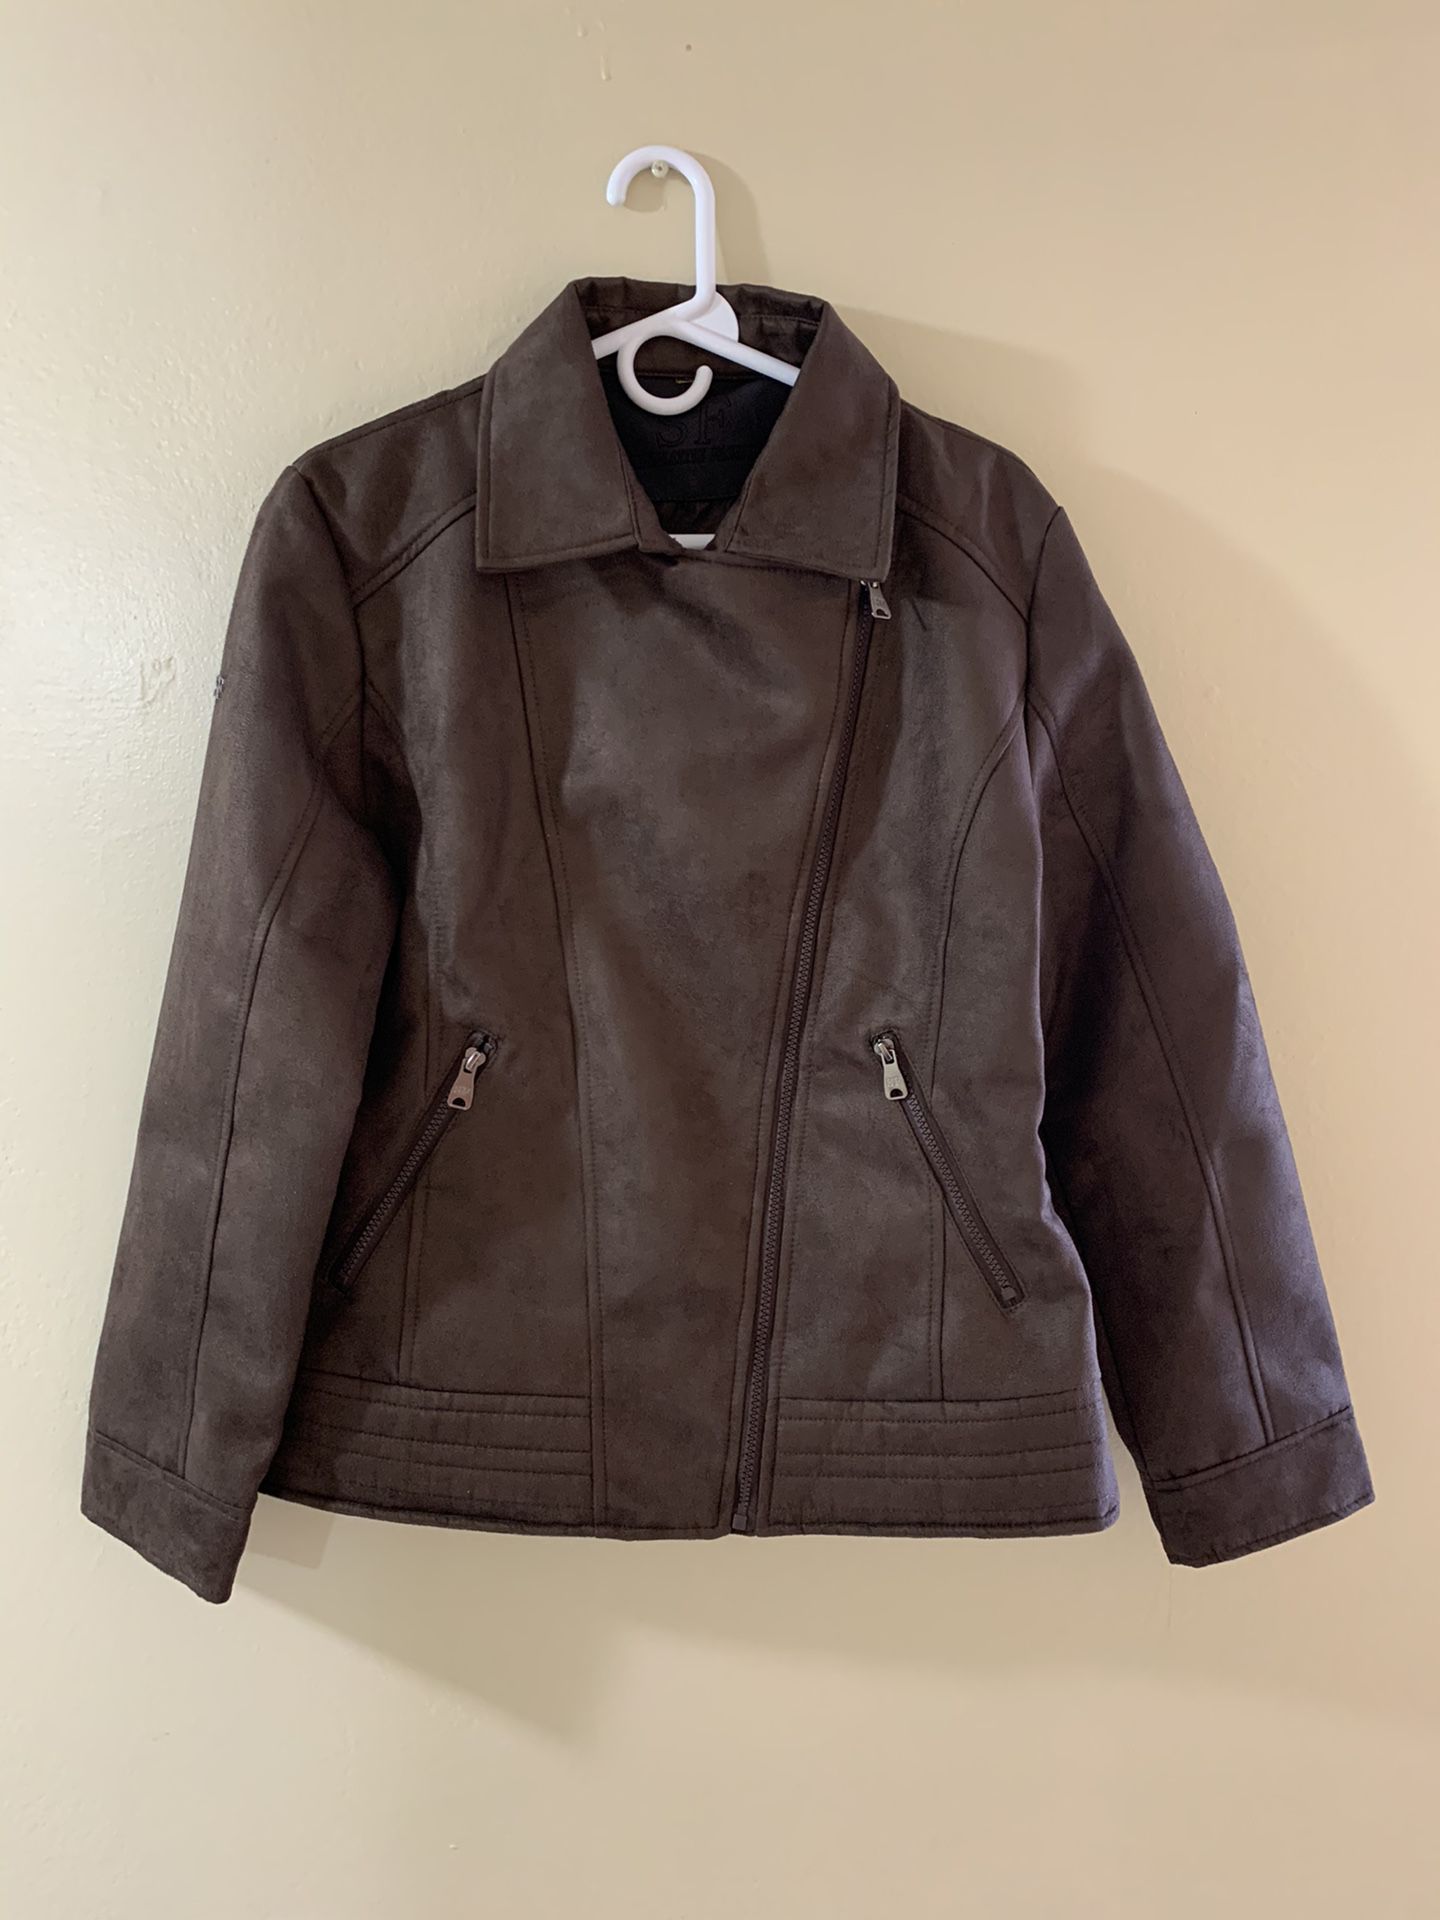 Brand new leather jacket superlative fashion made in italy